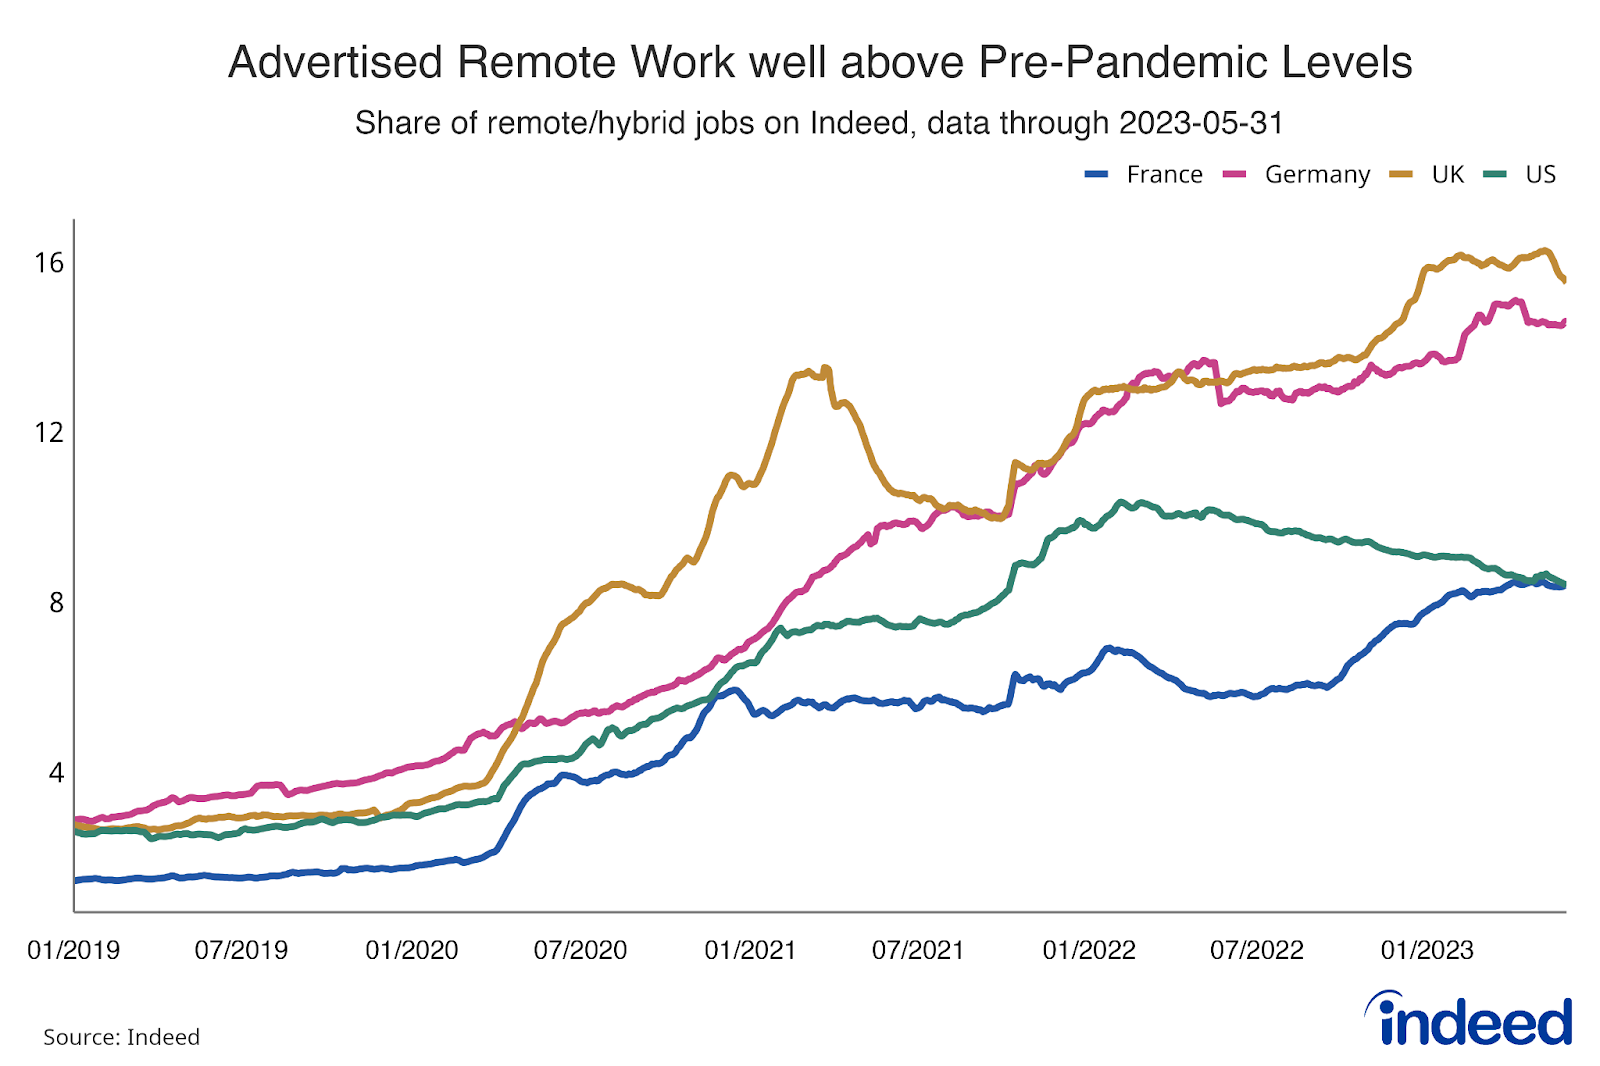 Line graph titled "Advertised Remote Work well above Pre-Pandemic Levels," showing the share of remote/hybrid jobs on Indeed for France, Germany, the UK, and the US.